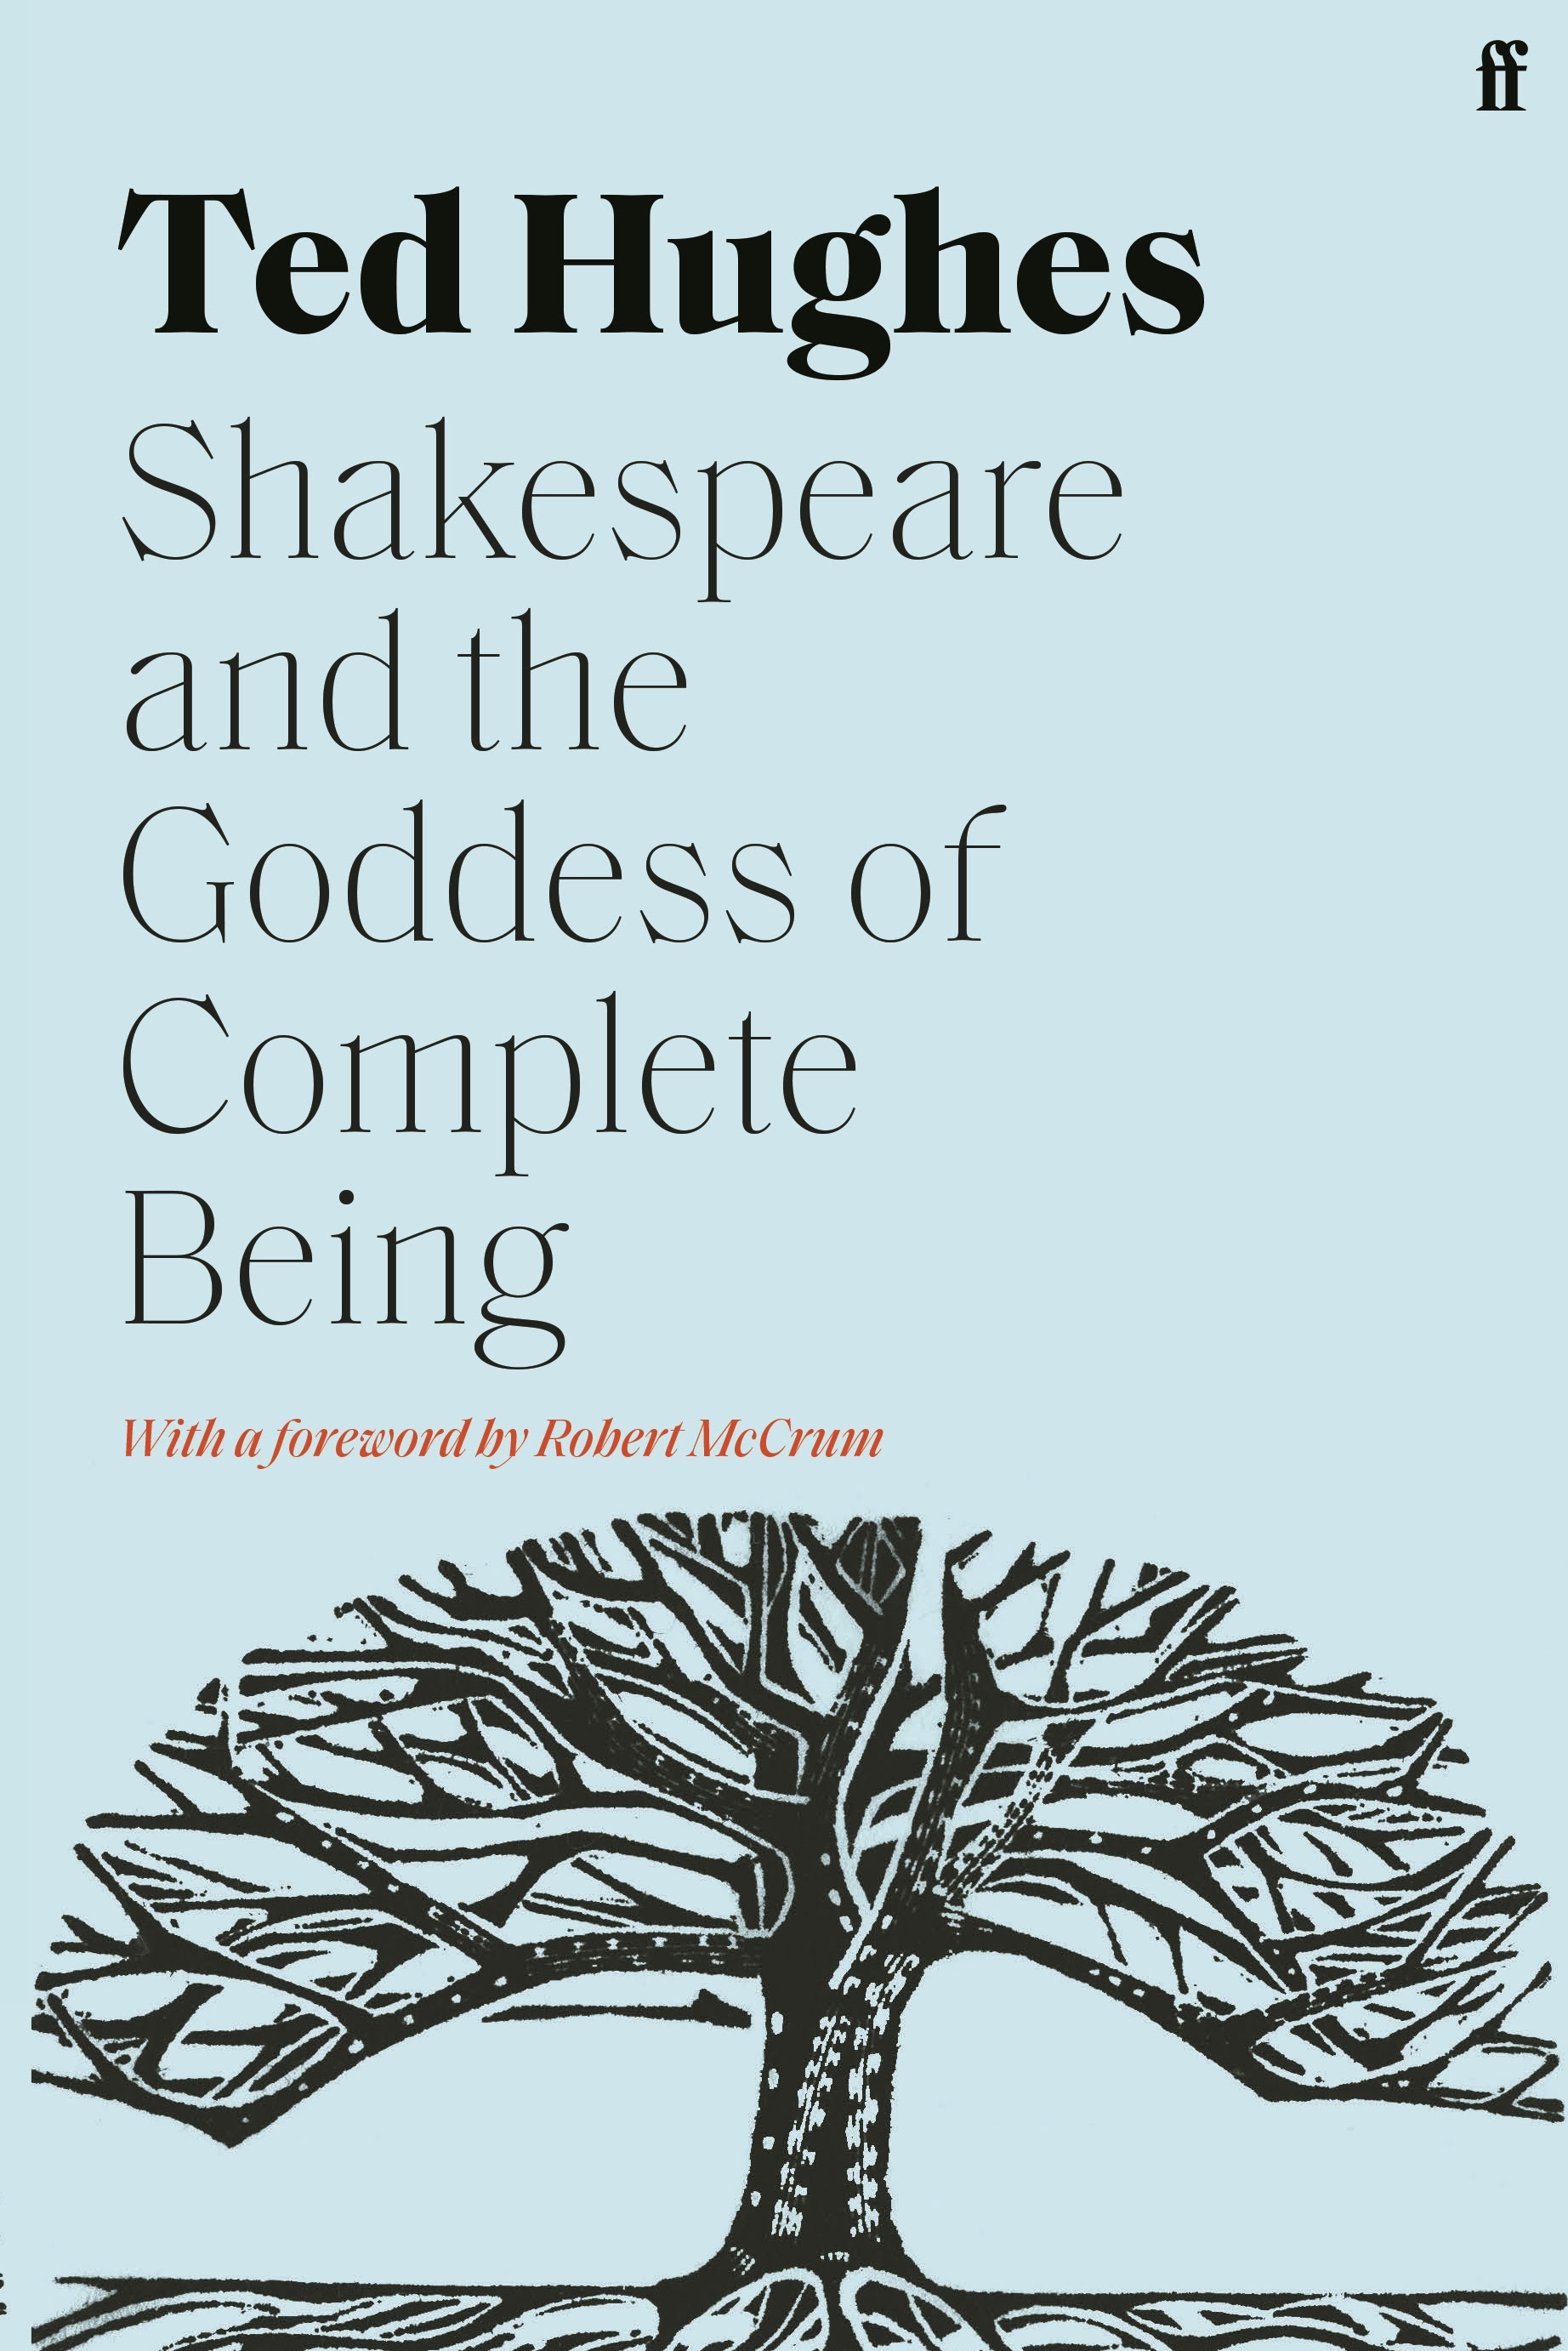 Shakespeare and the Goddess of Complete Being in Kindle/PDF/EPUB